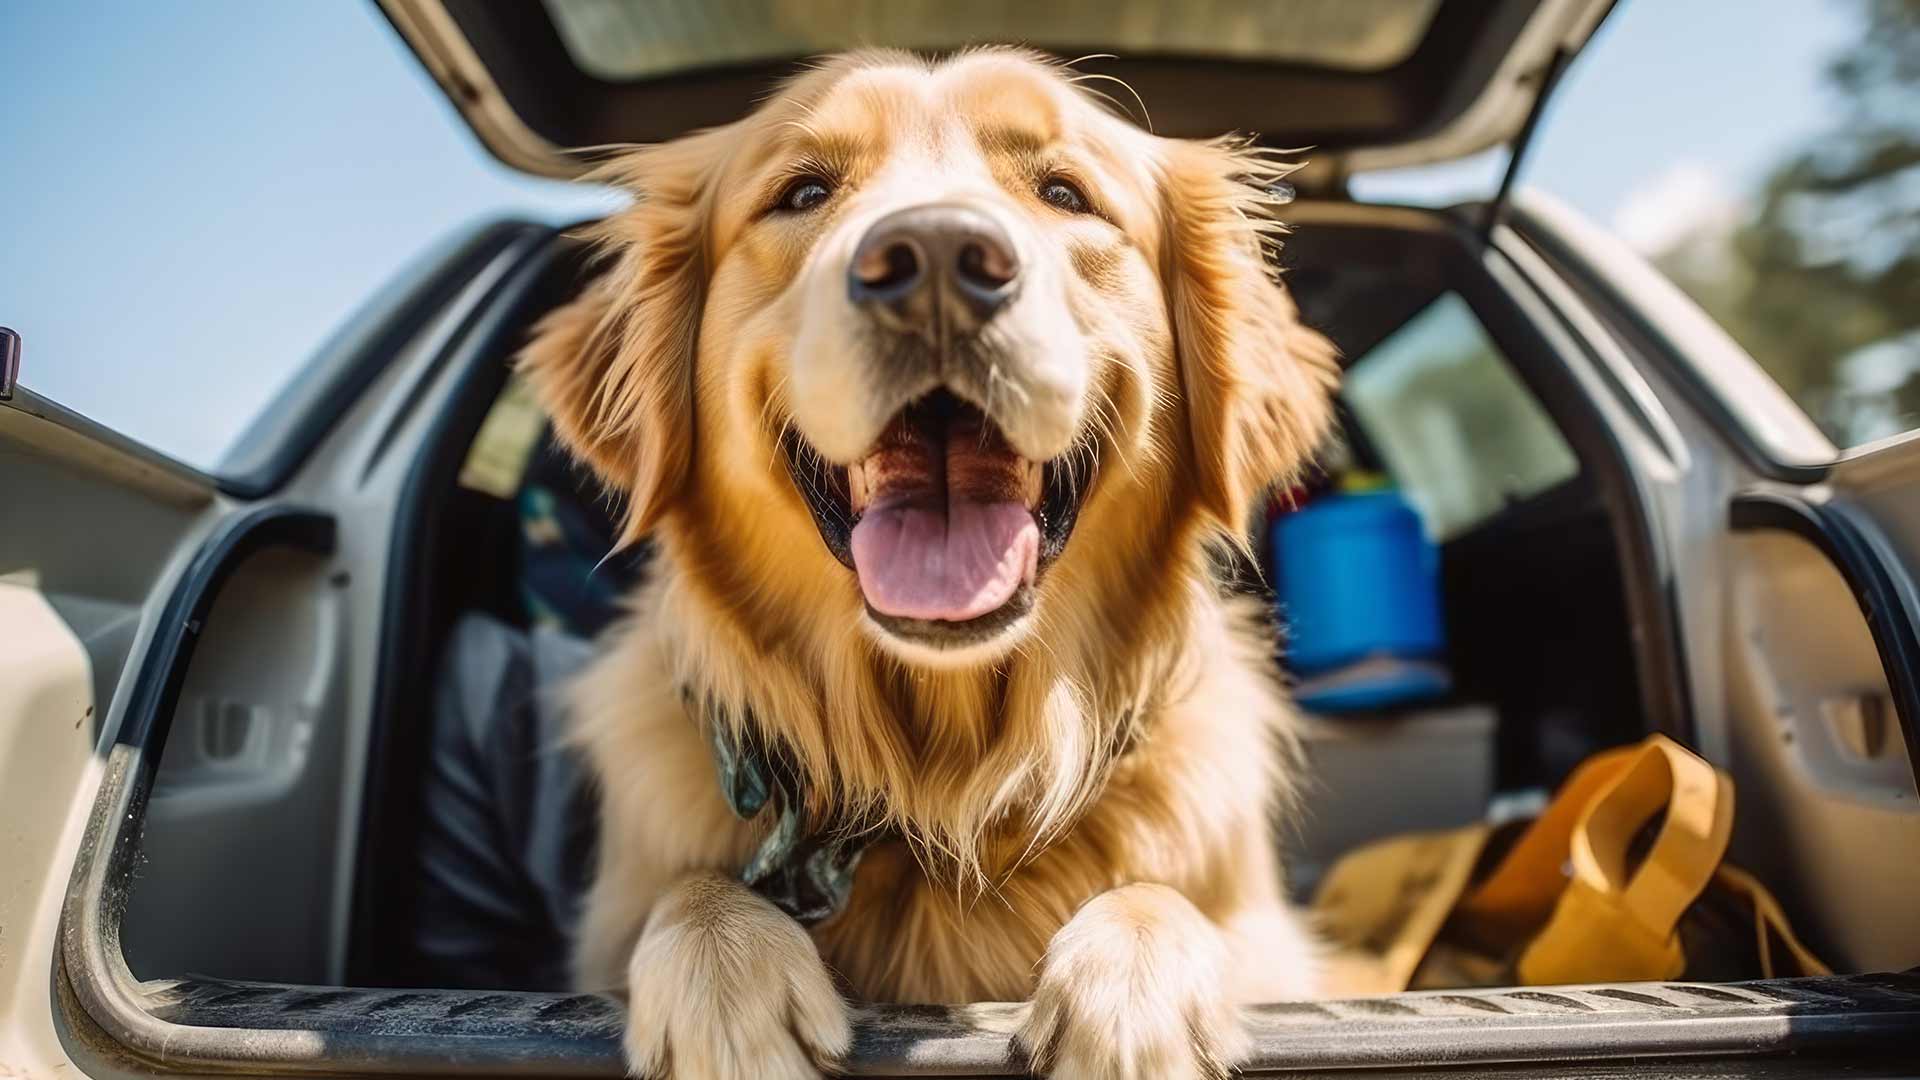 Camp with your best friend: take your pet on your next adventure